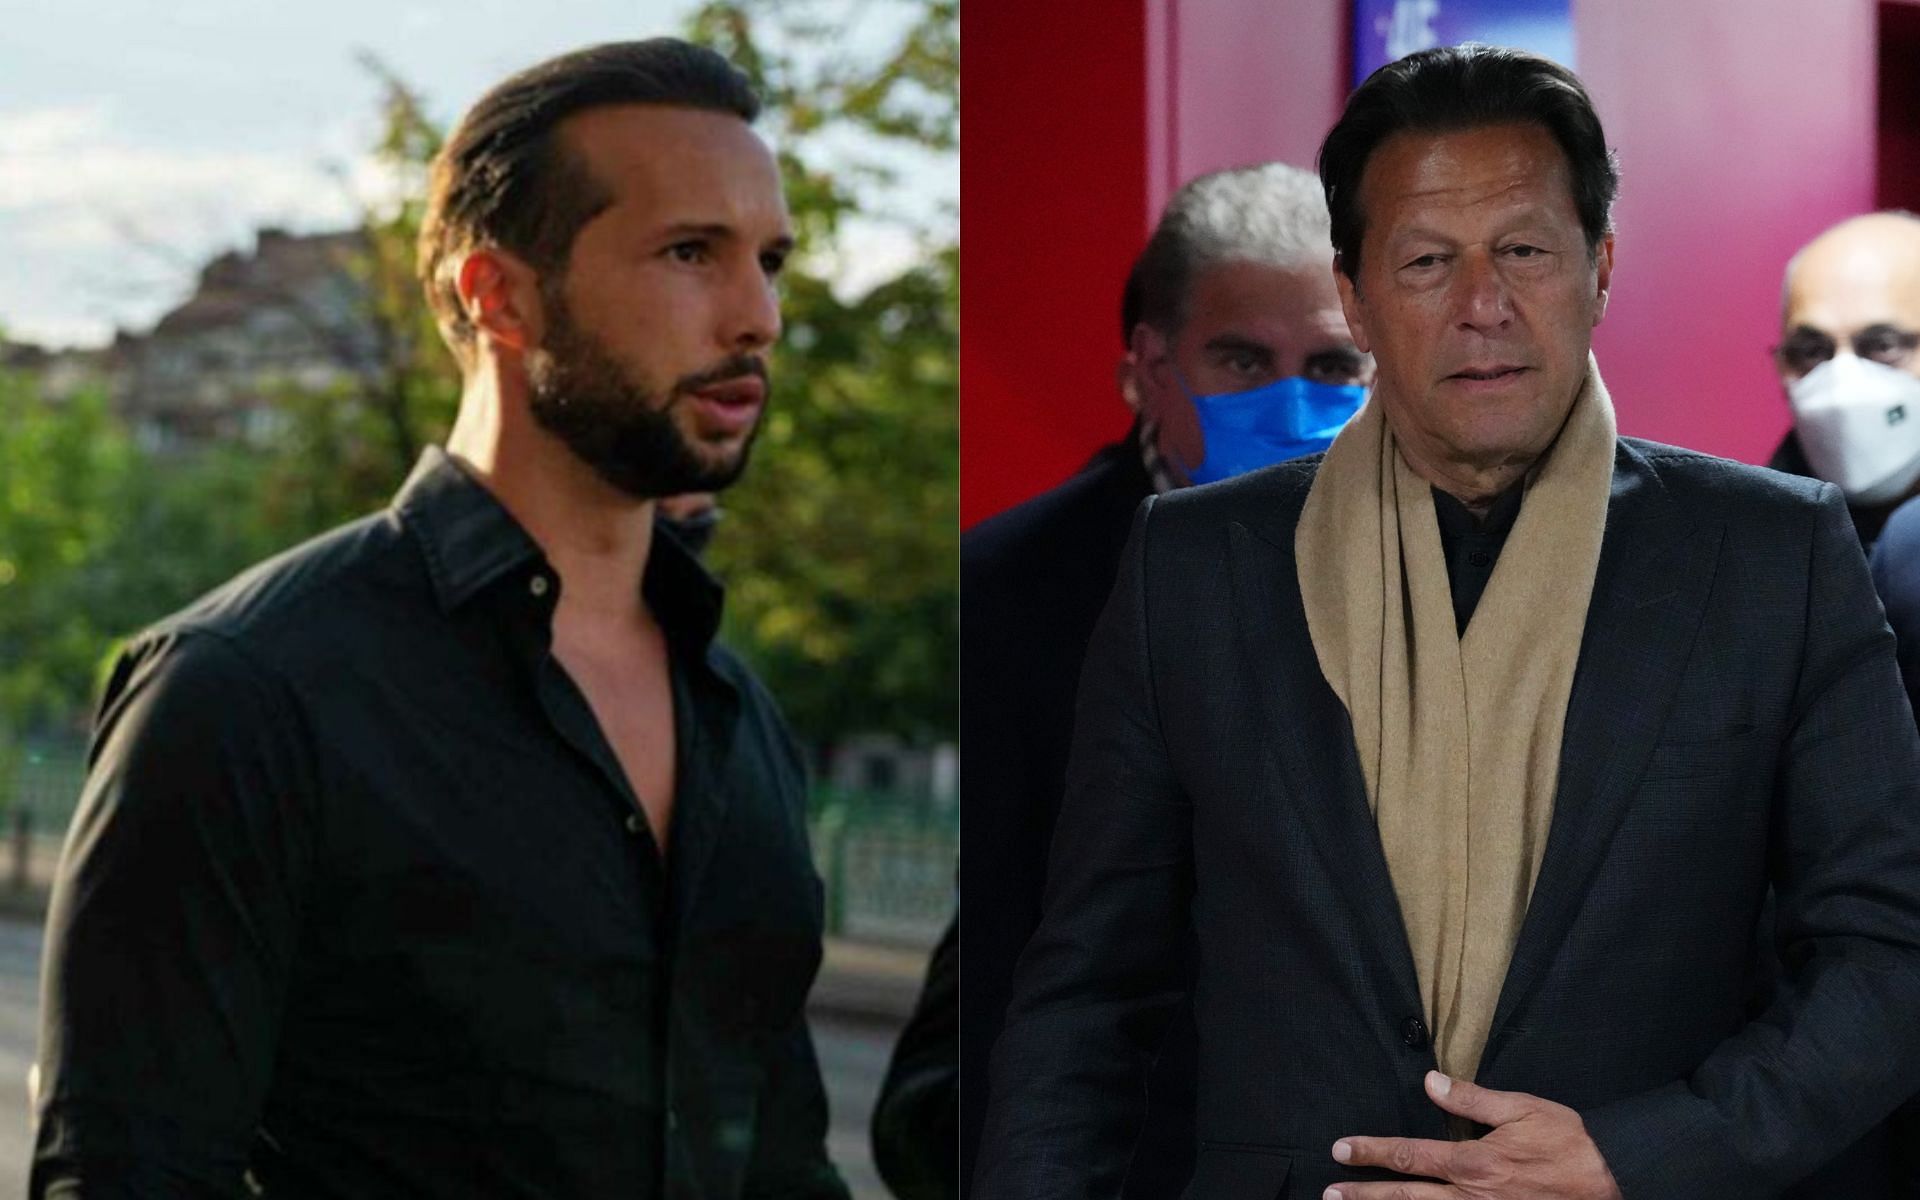 Tristan Tate (left) and Imran Khan (right) (Image credits Getty Images and @TateTheTalisman on Twitter)